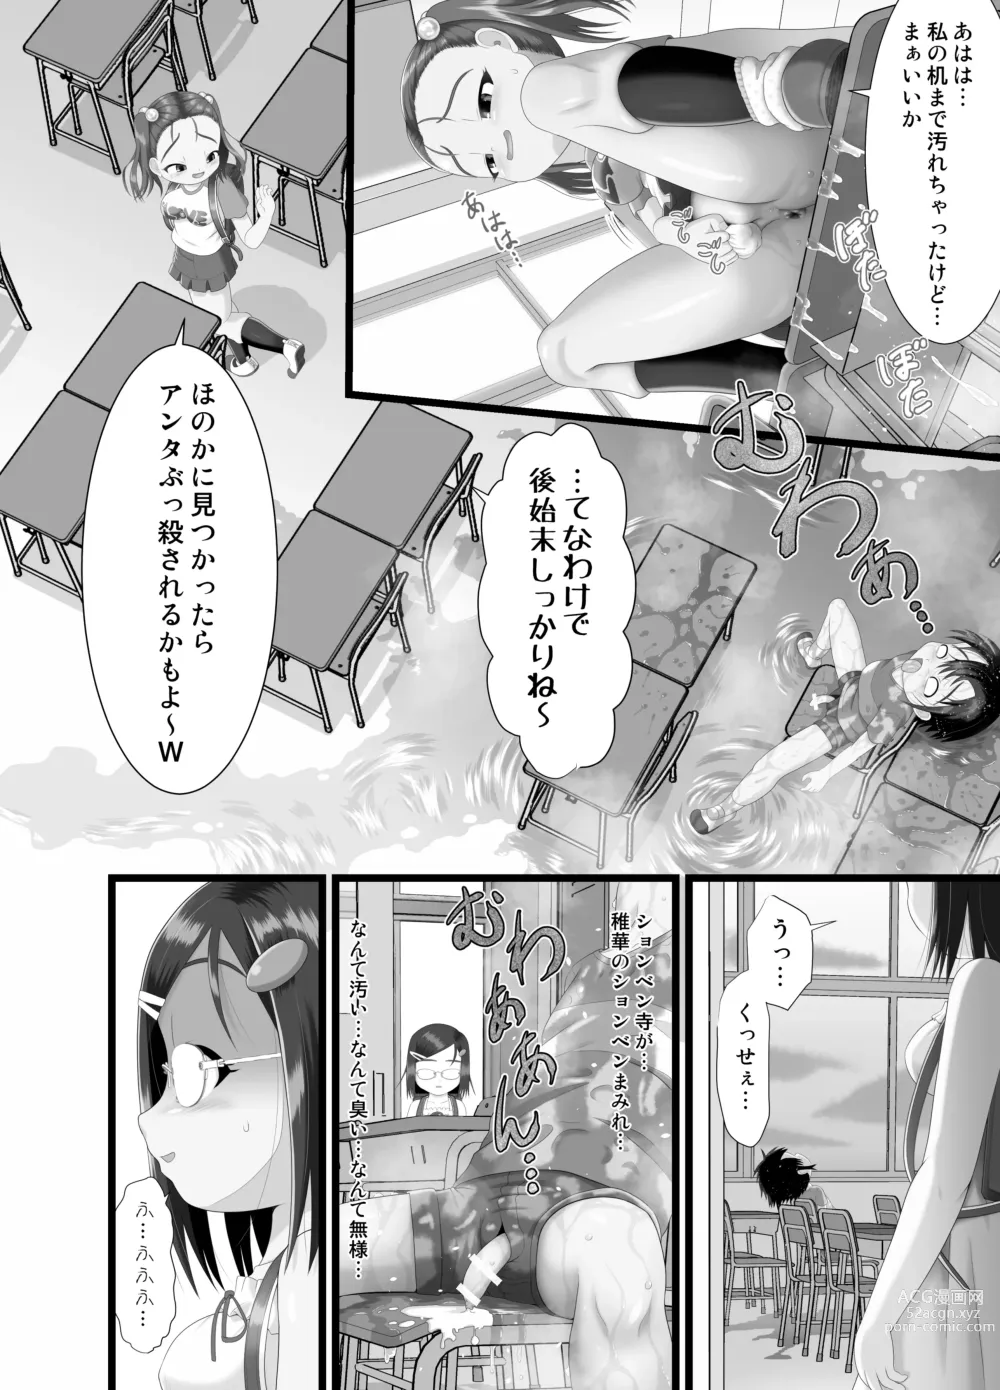 Page 16 of doujinshi Sanistand #4